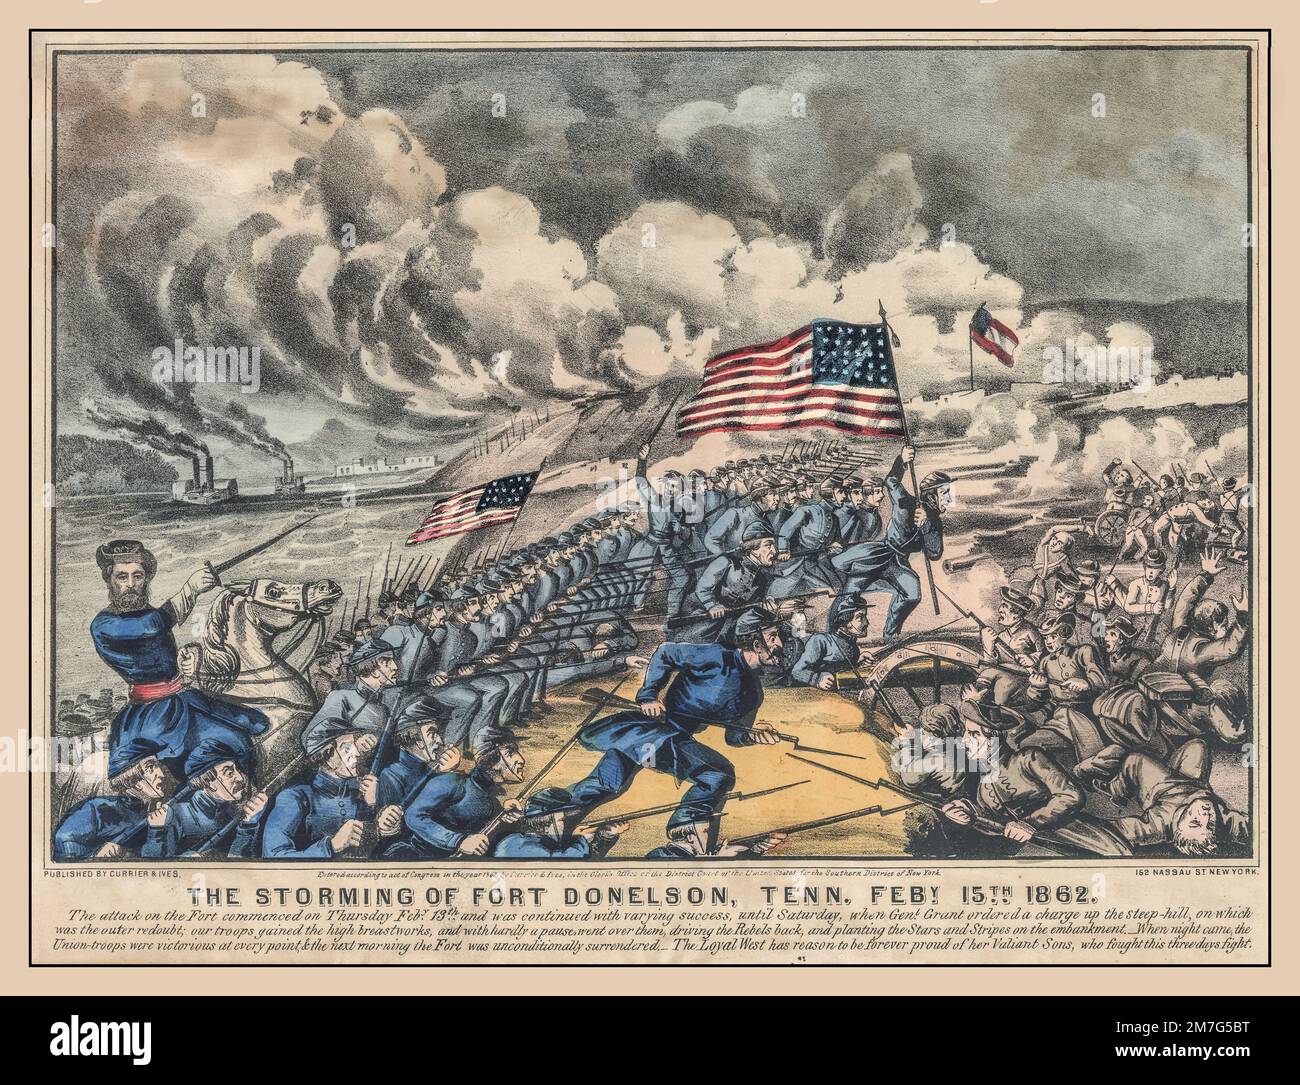 AMERICAN CIVIL WAR LITHOGRAPH  'The Storming Of Fort Donelson, Tennessee . February. 15th 1862.' Hand colored lithograph by Currier and Ives, New York, 1862. Stock Photo